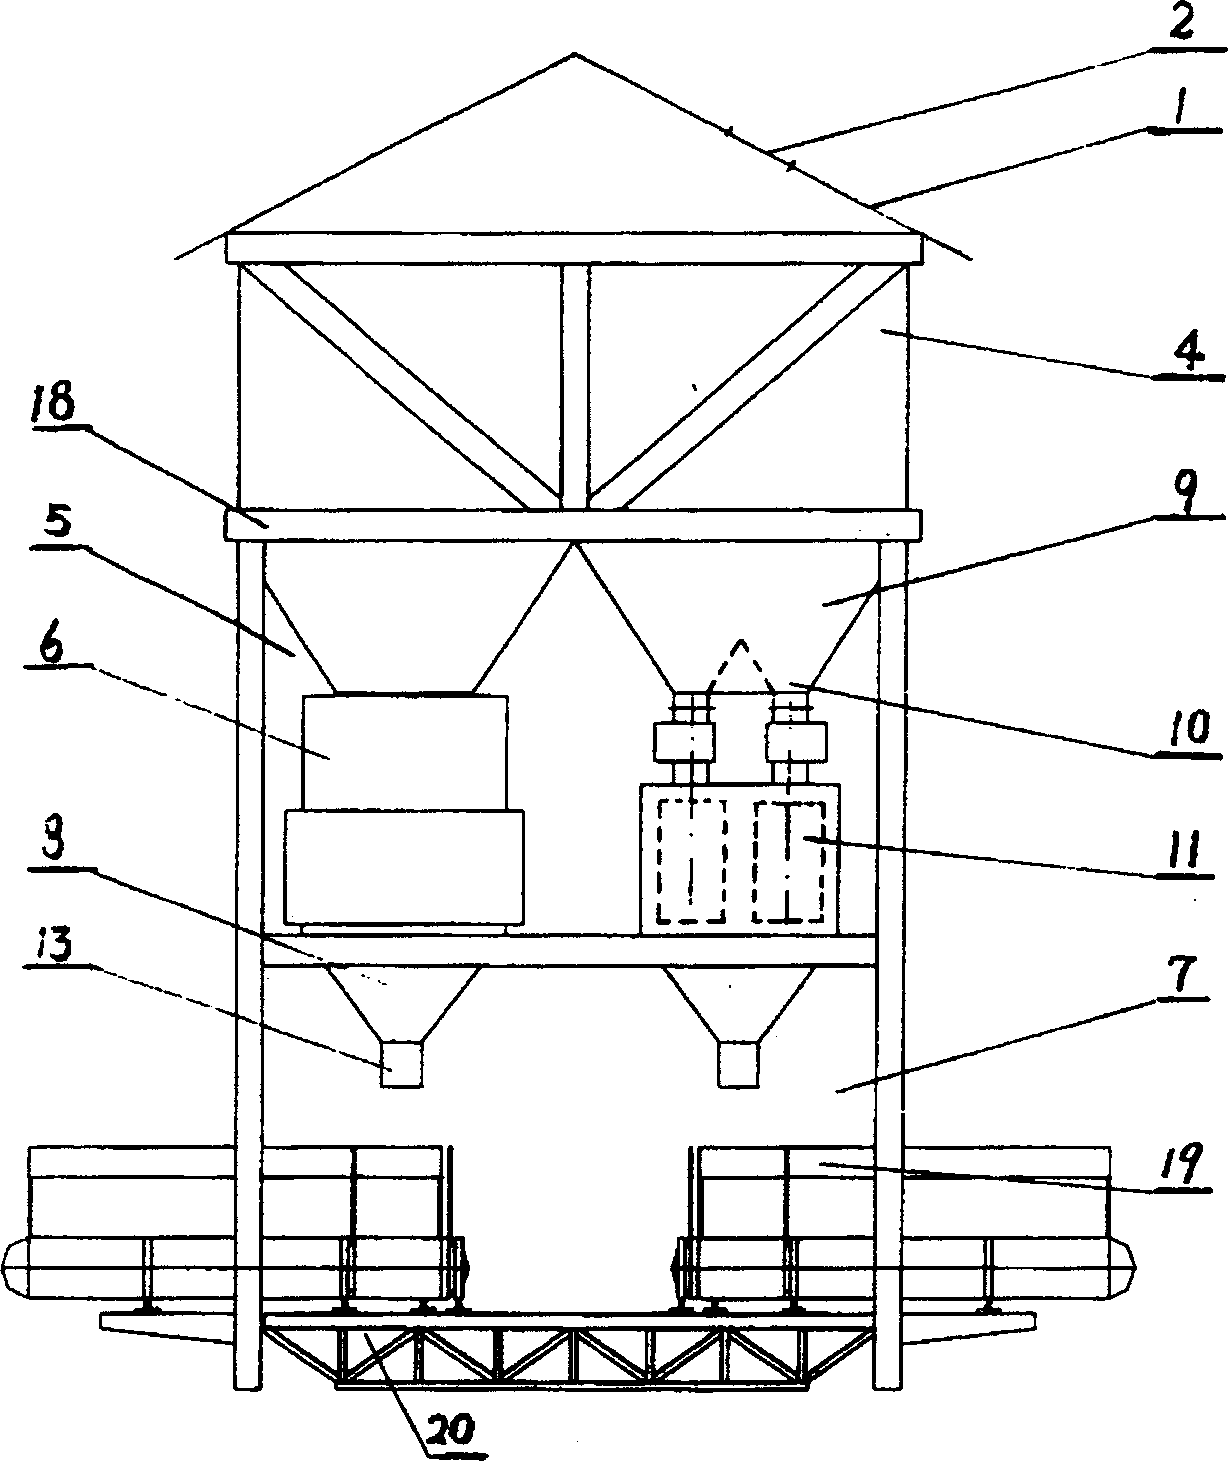 Method andapparatus for pouring bulk material in bags at port